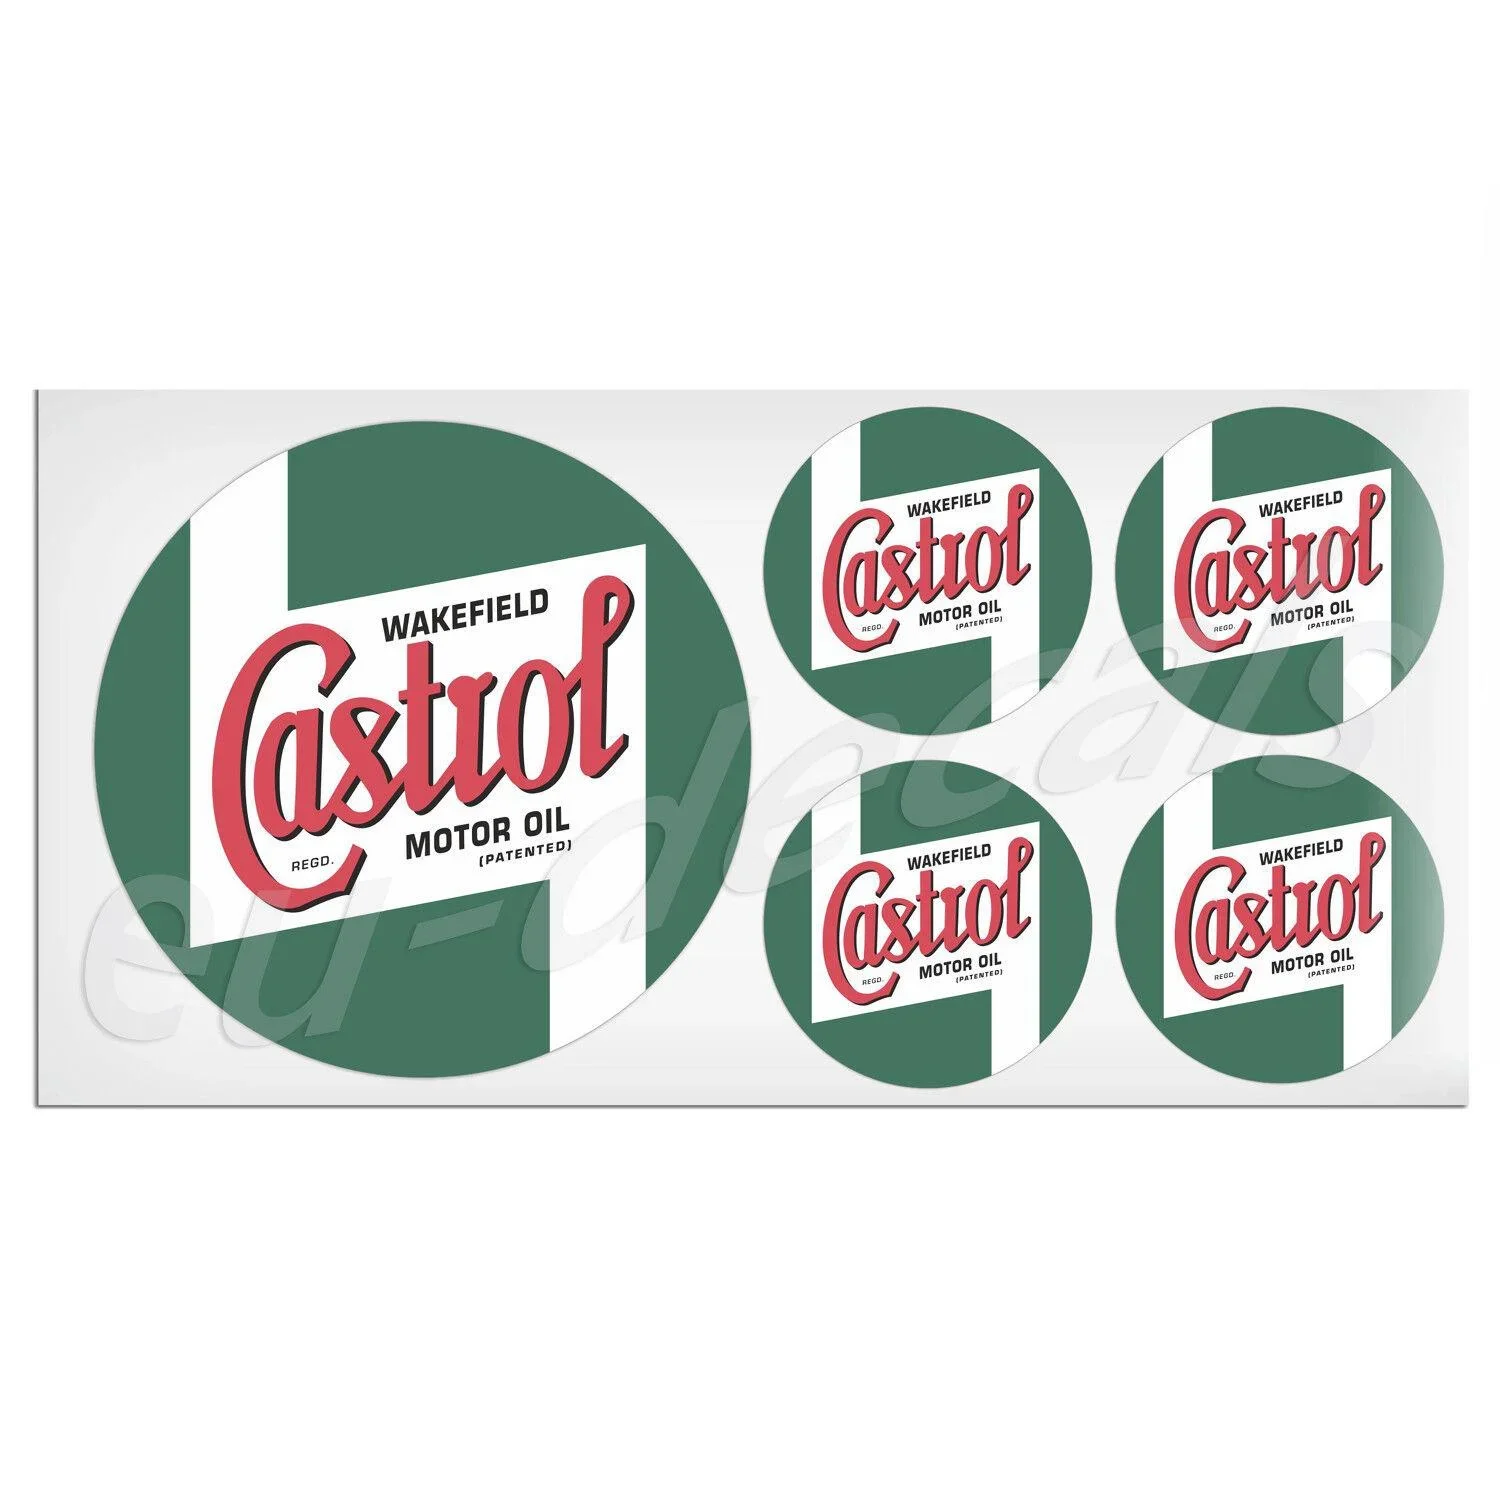 

For 100mm-4* & 50mm-2" Vintage Castrol Oil Laminated Decal Sticker Vespa Vw Classic